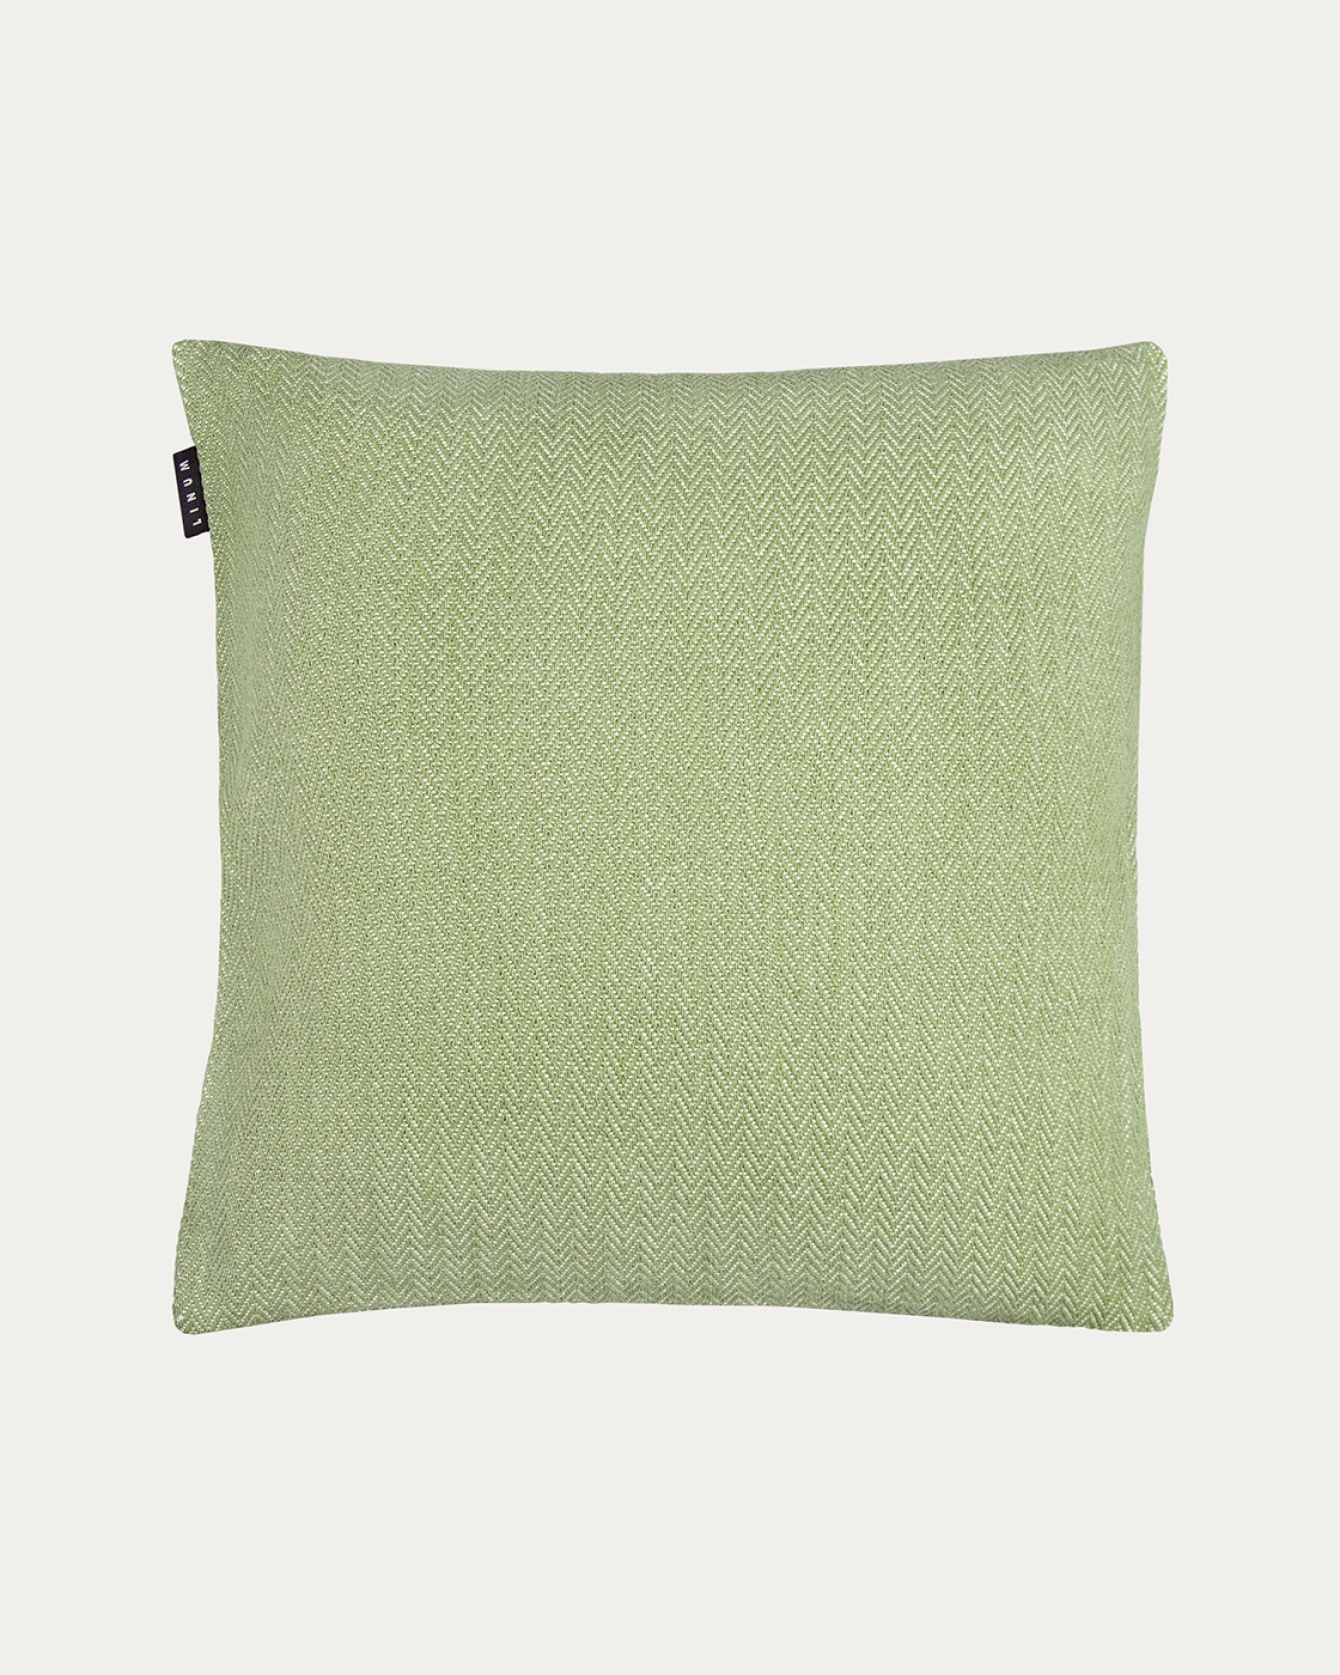 Product image moss green SHEPARD cushion cover made of soft cotton with a discreet herringbone pattern from LINUM DESIGN. Size 50x50 cm.